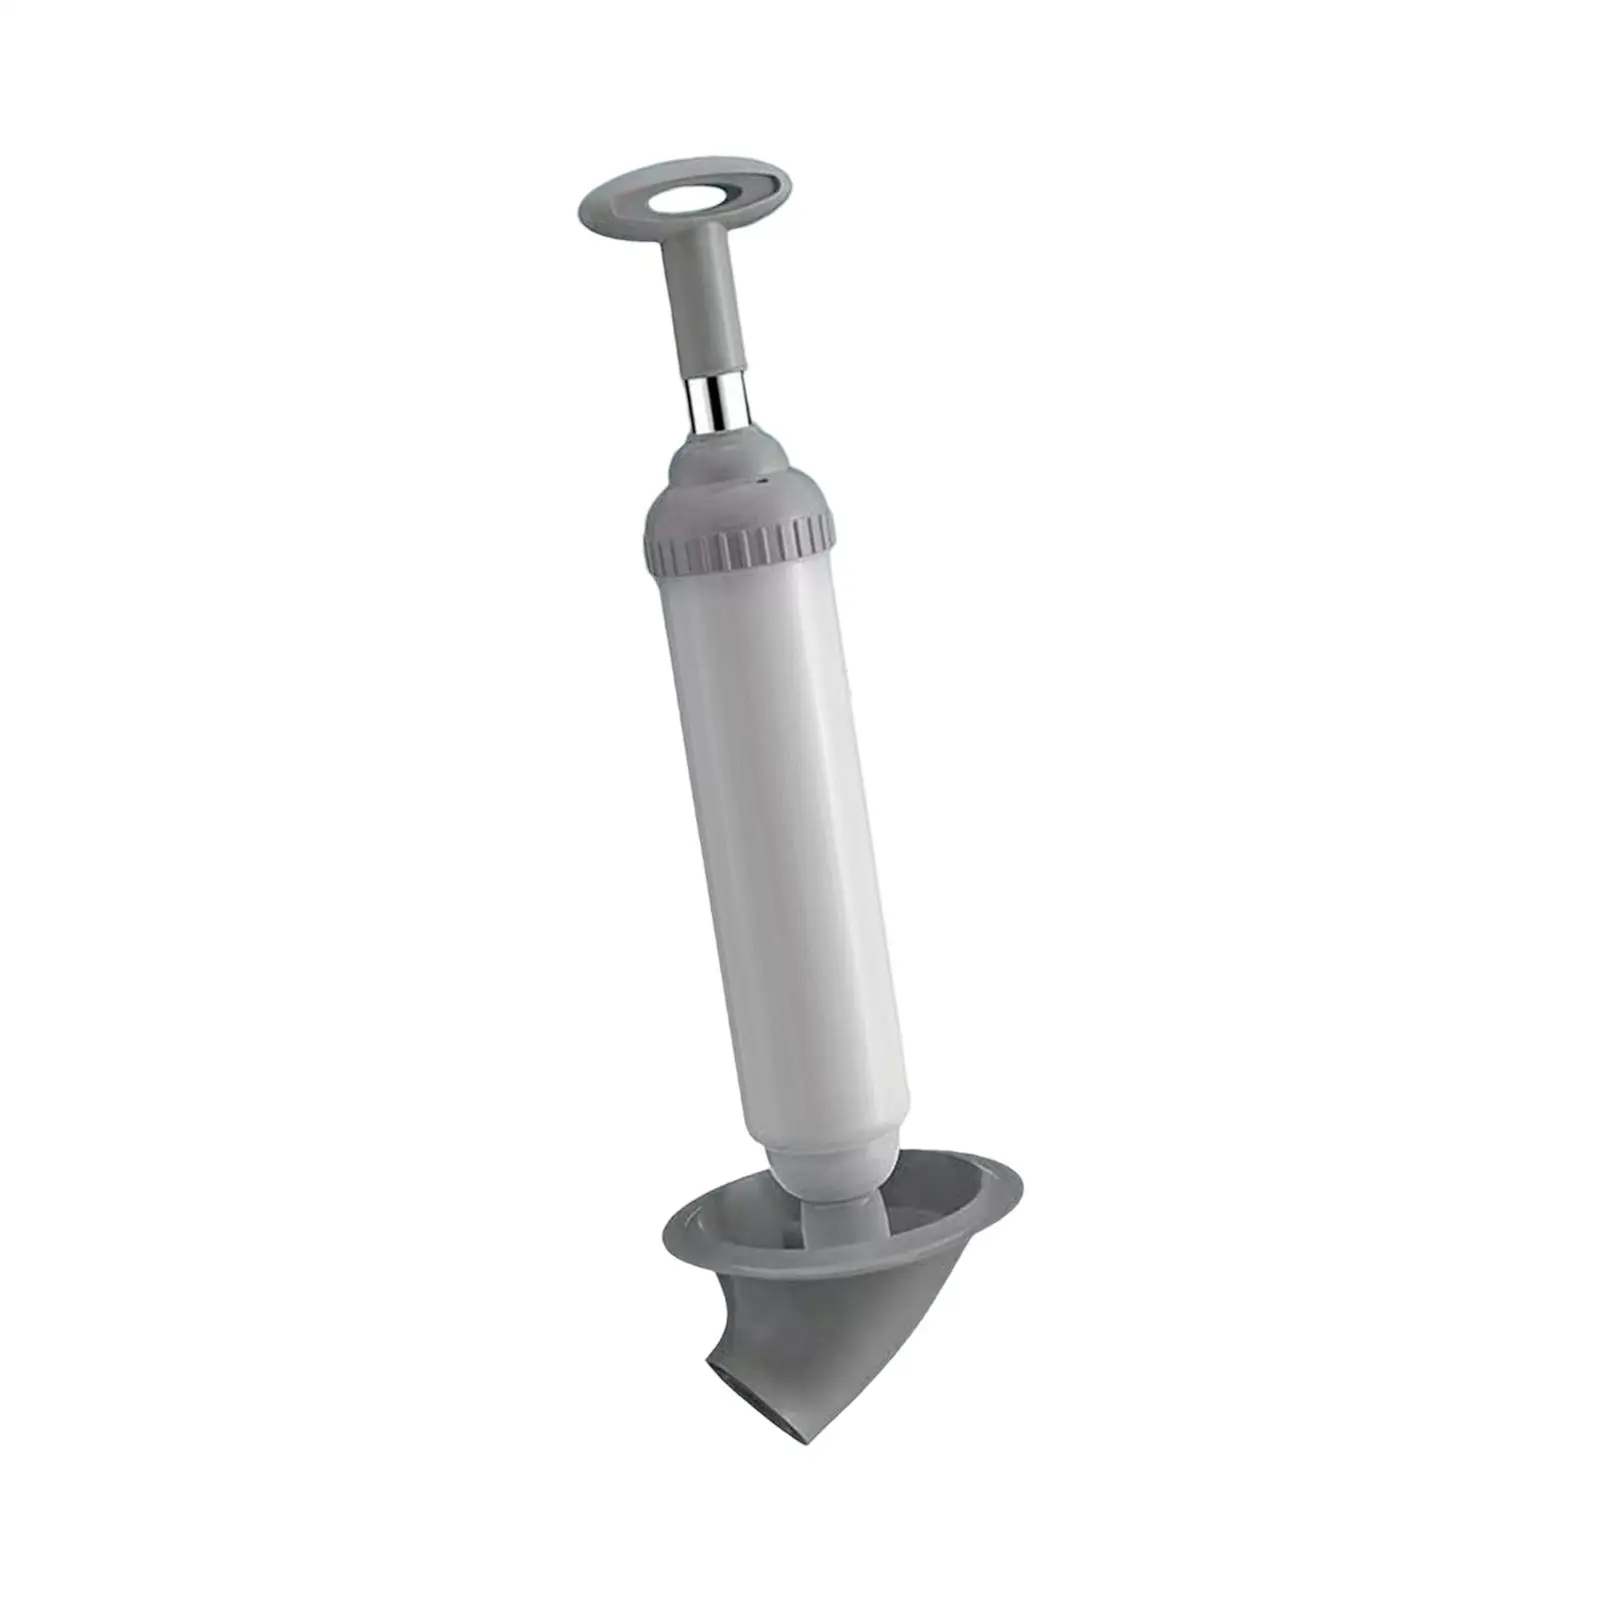 Vacuum Toilet Air Plunger Strong Suction Performance Drain Plunger for Sewer Dredging Plunger Sink Shower Bath